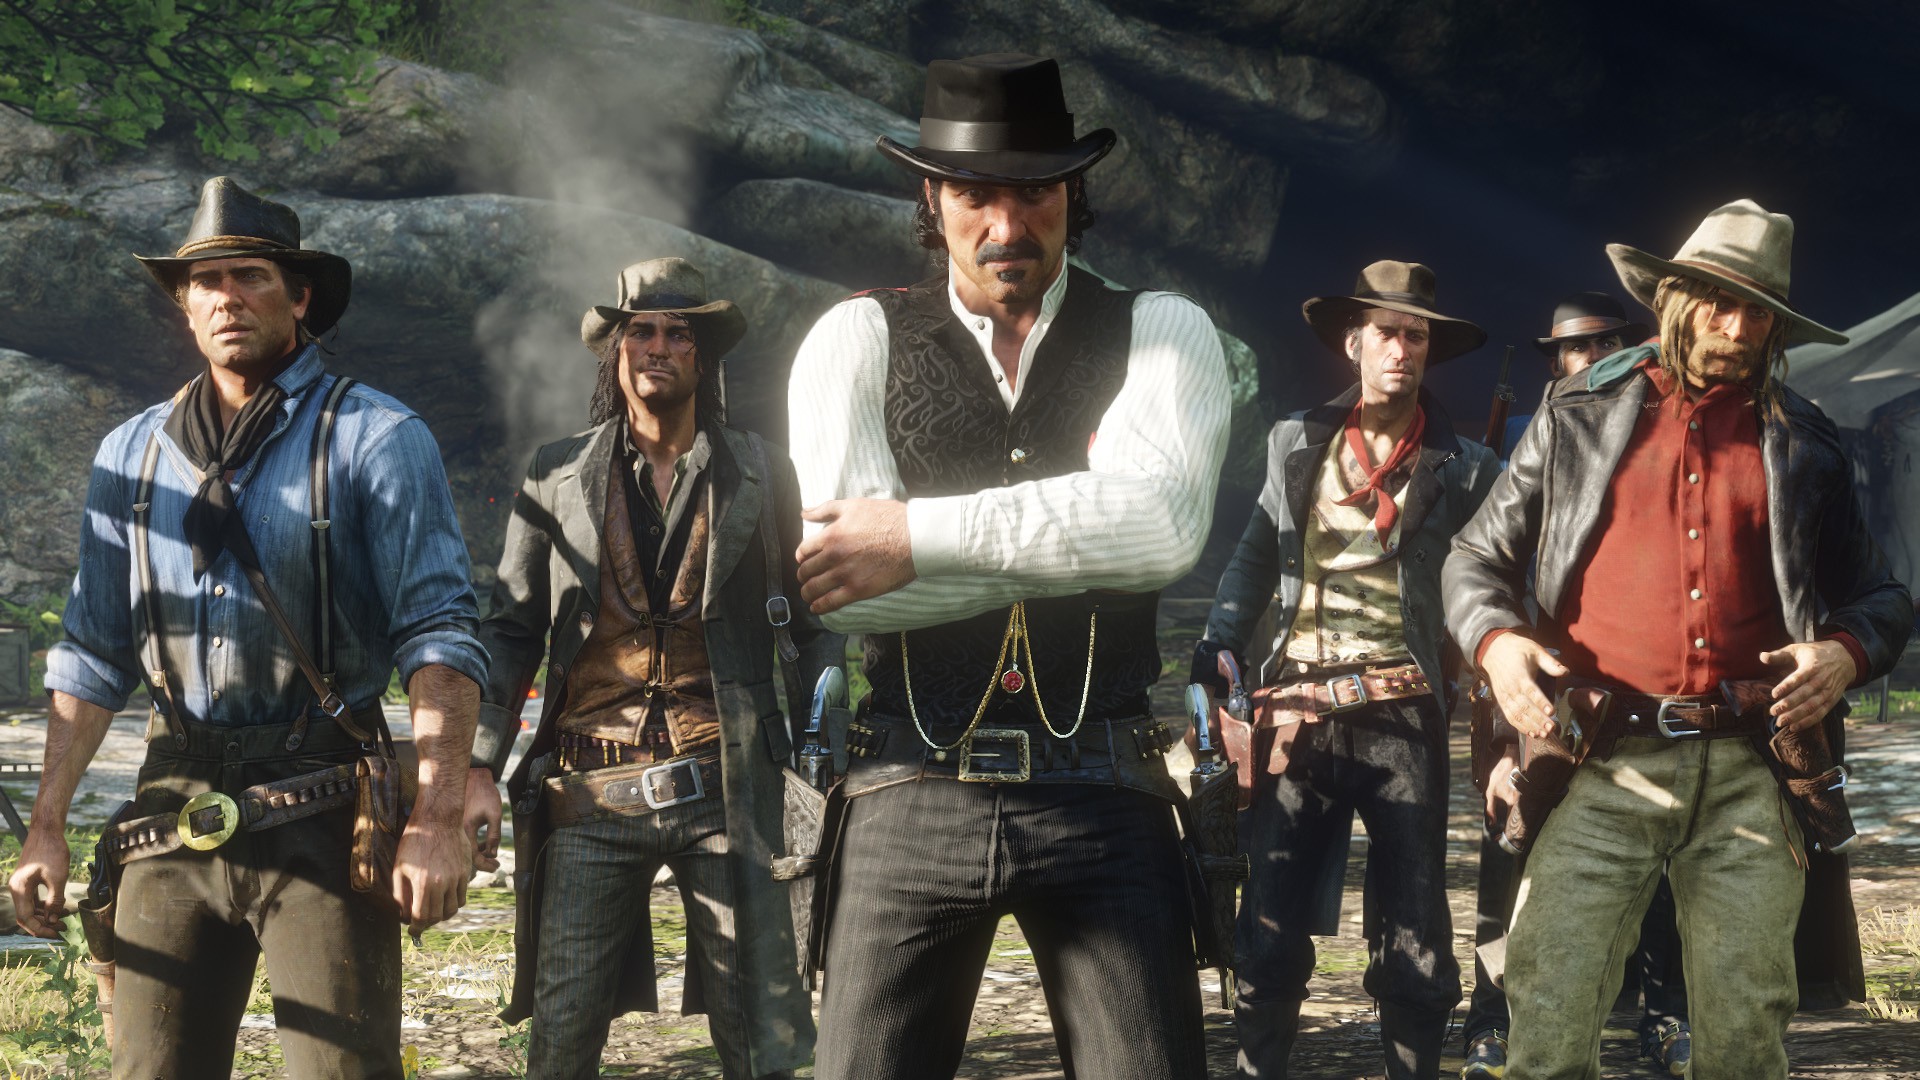 Why Red Dead Online players are starting over after hundreds of